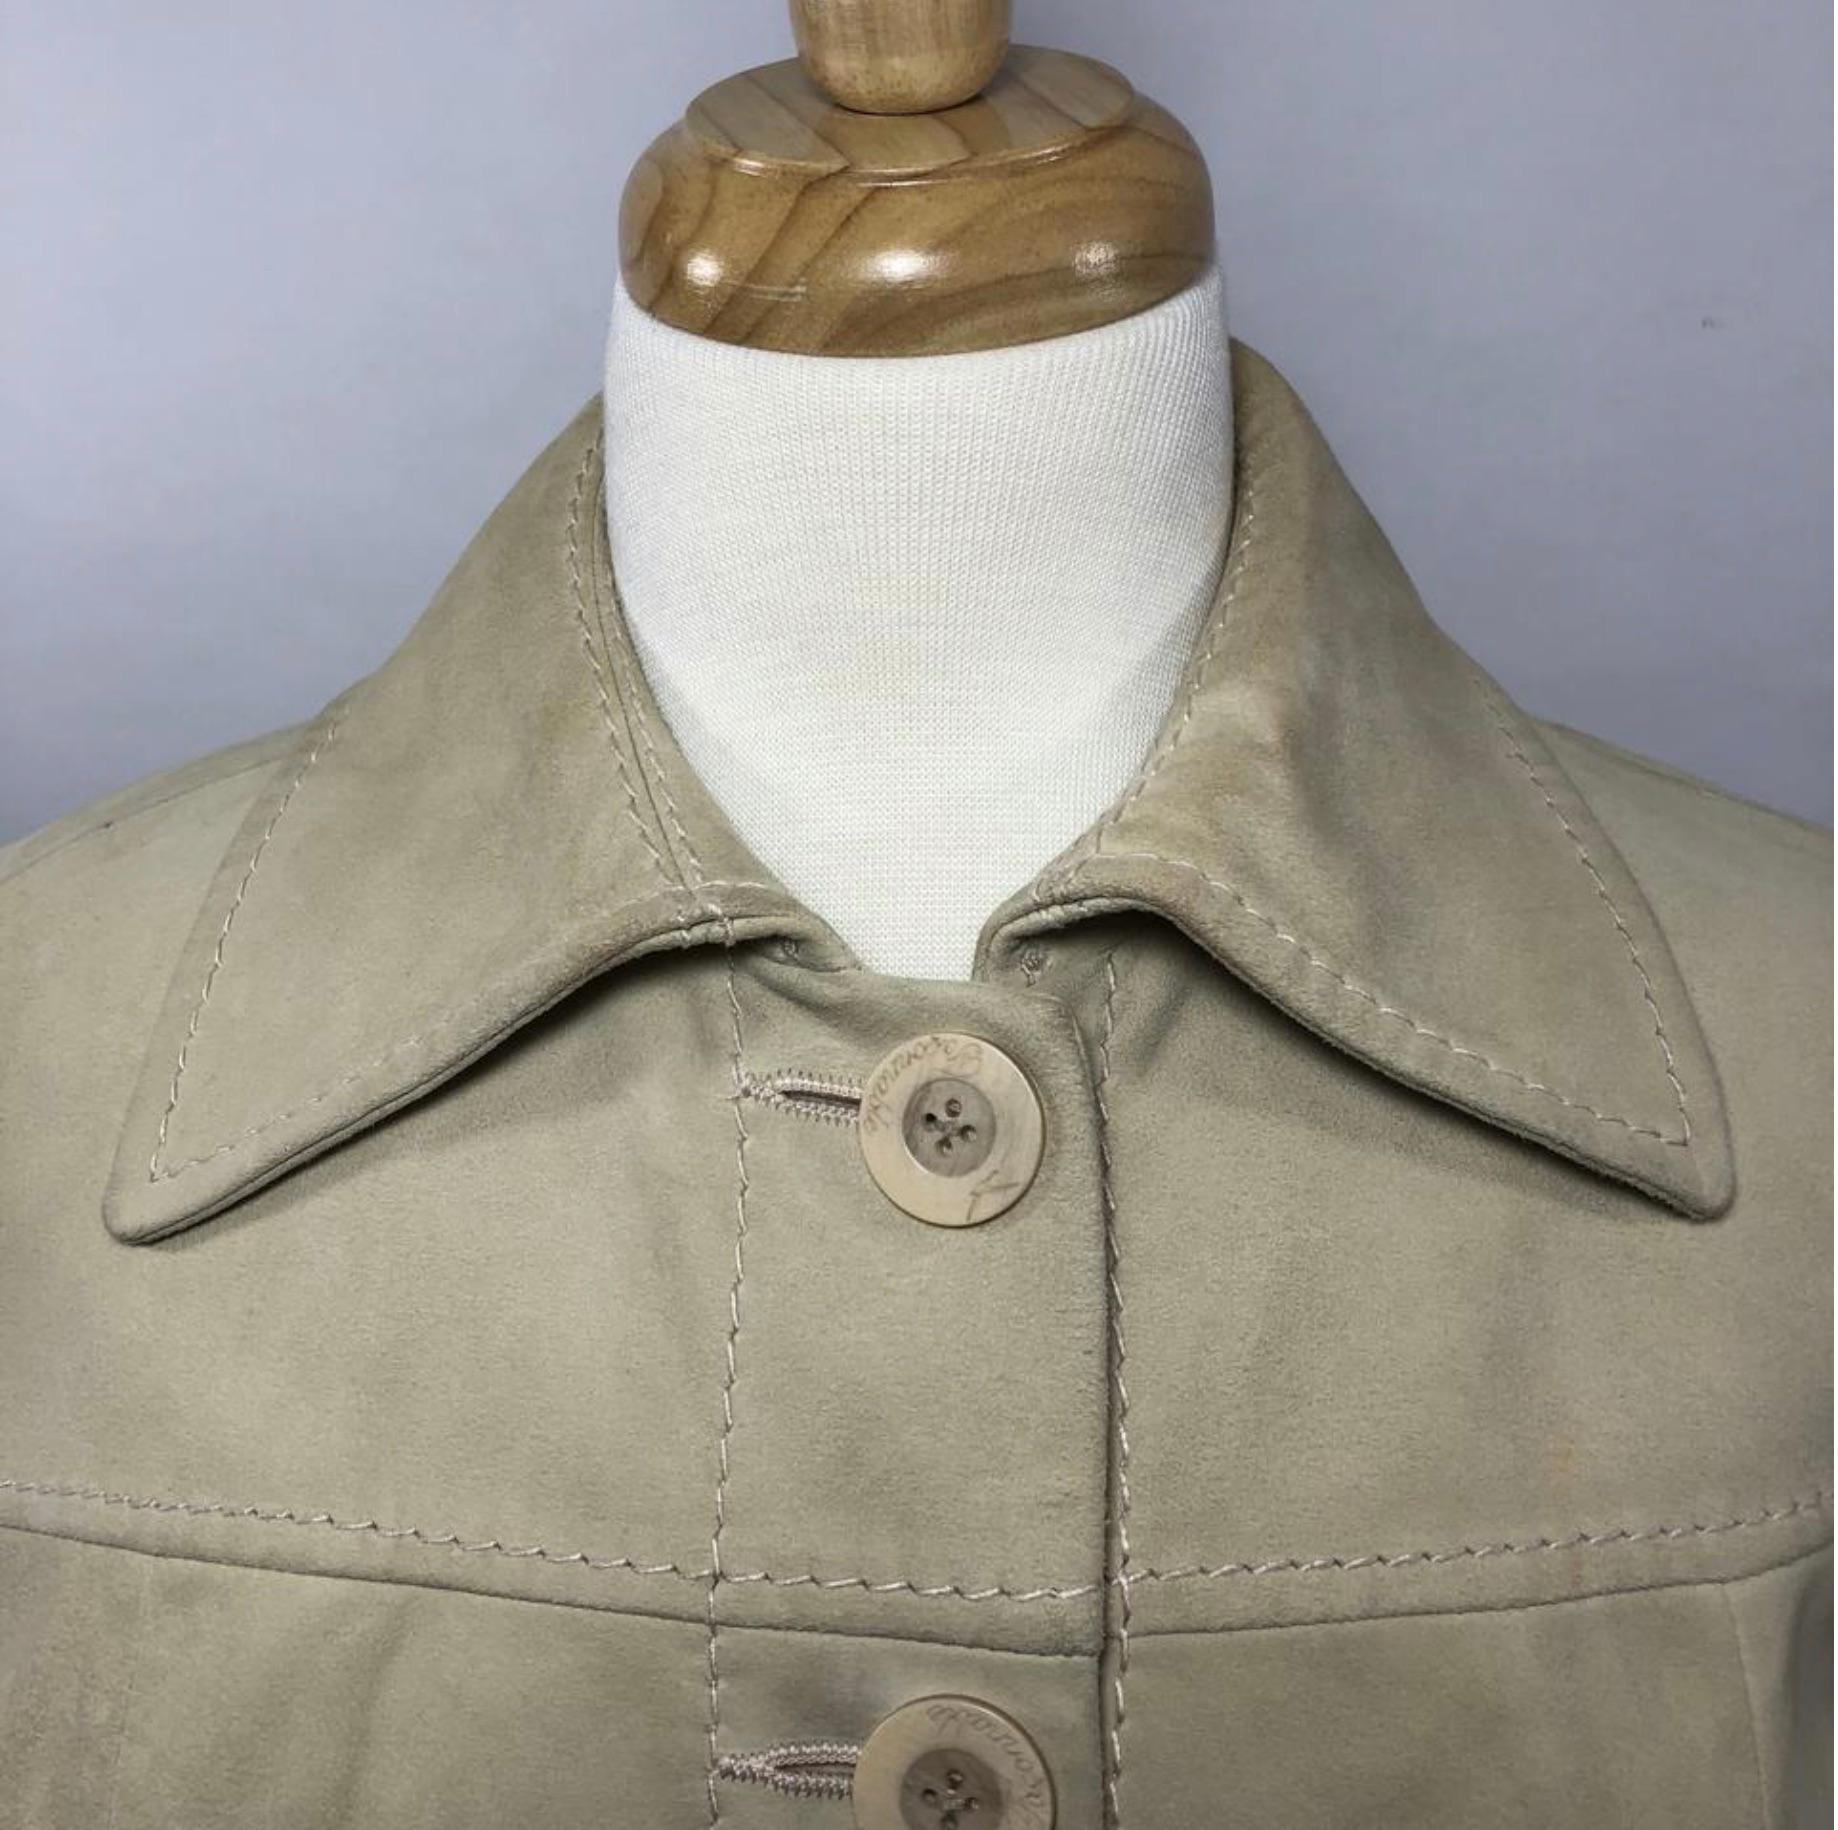 Faconnable Goatskin Fall or Spring Jacket with Belt For Sale 2